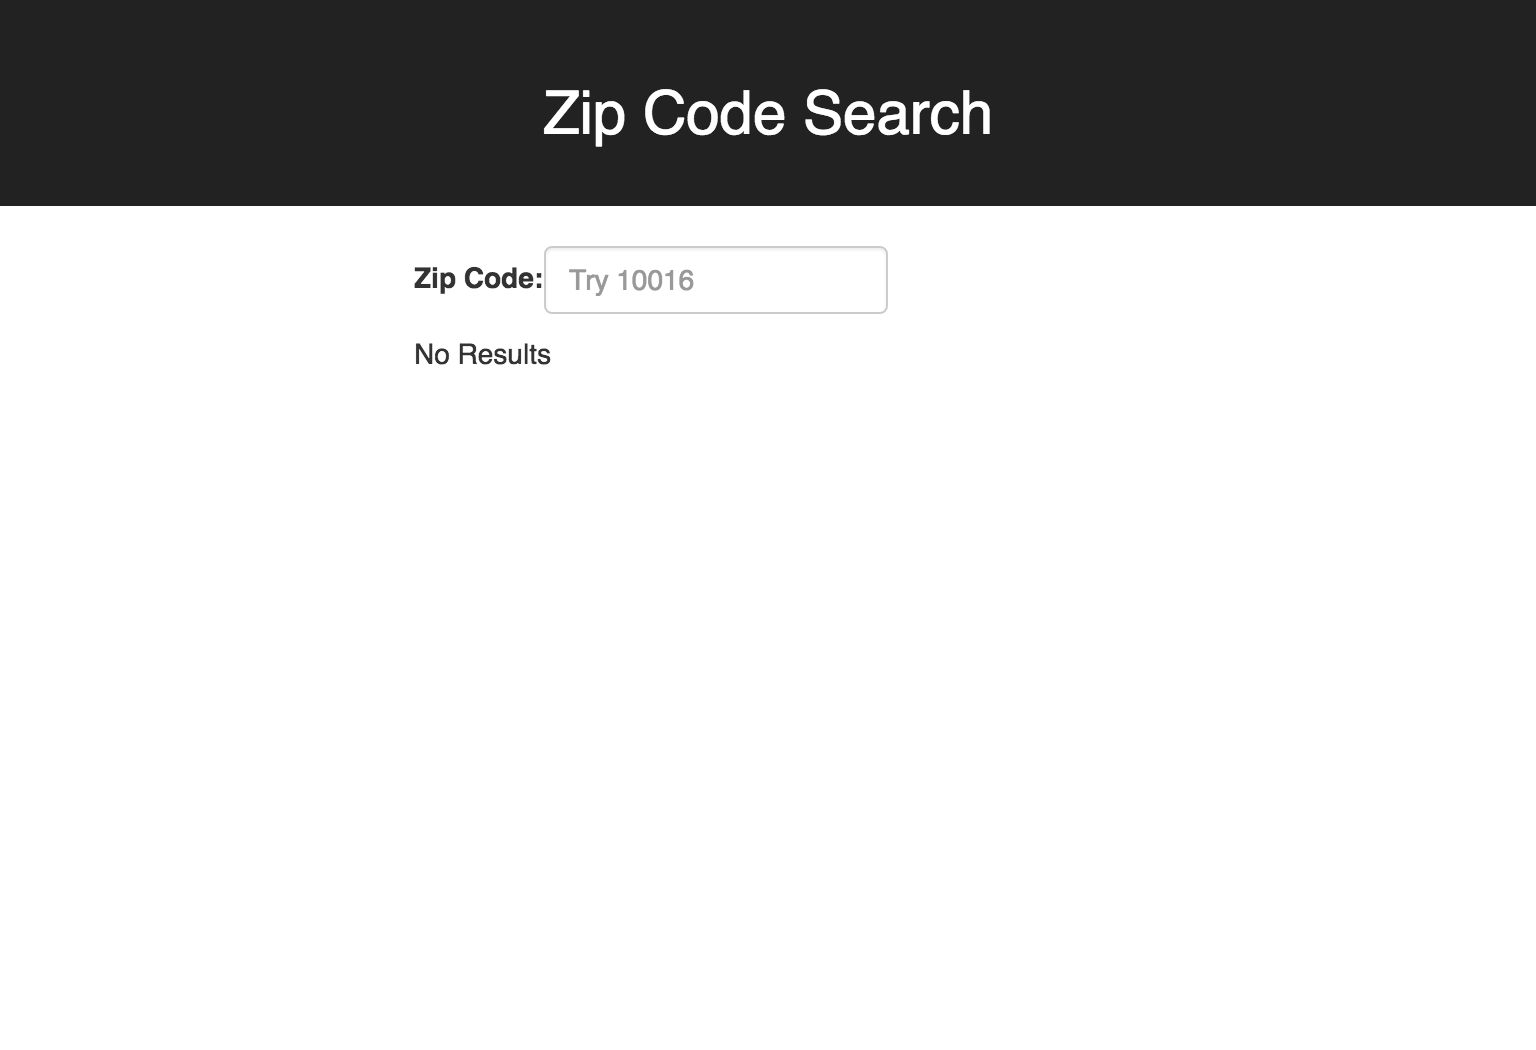 Input field for searching Zip codes